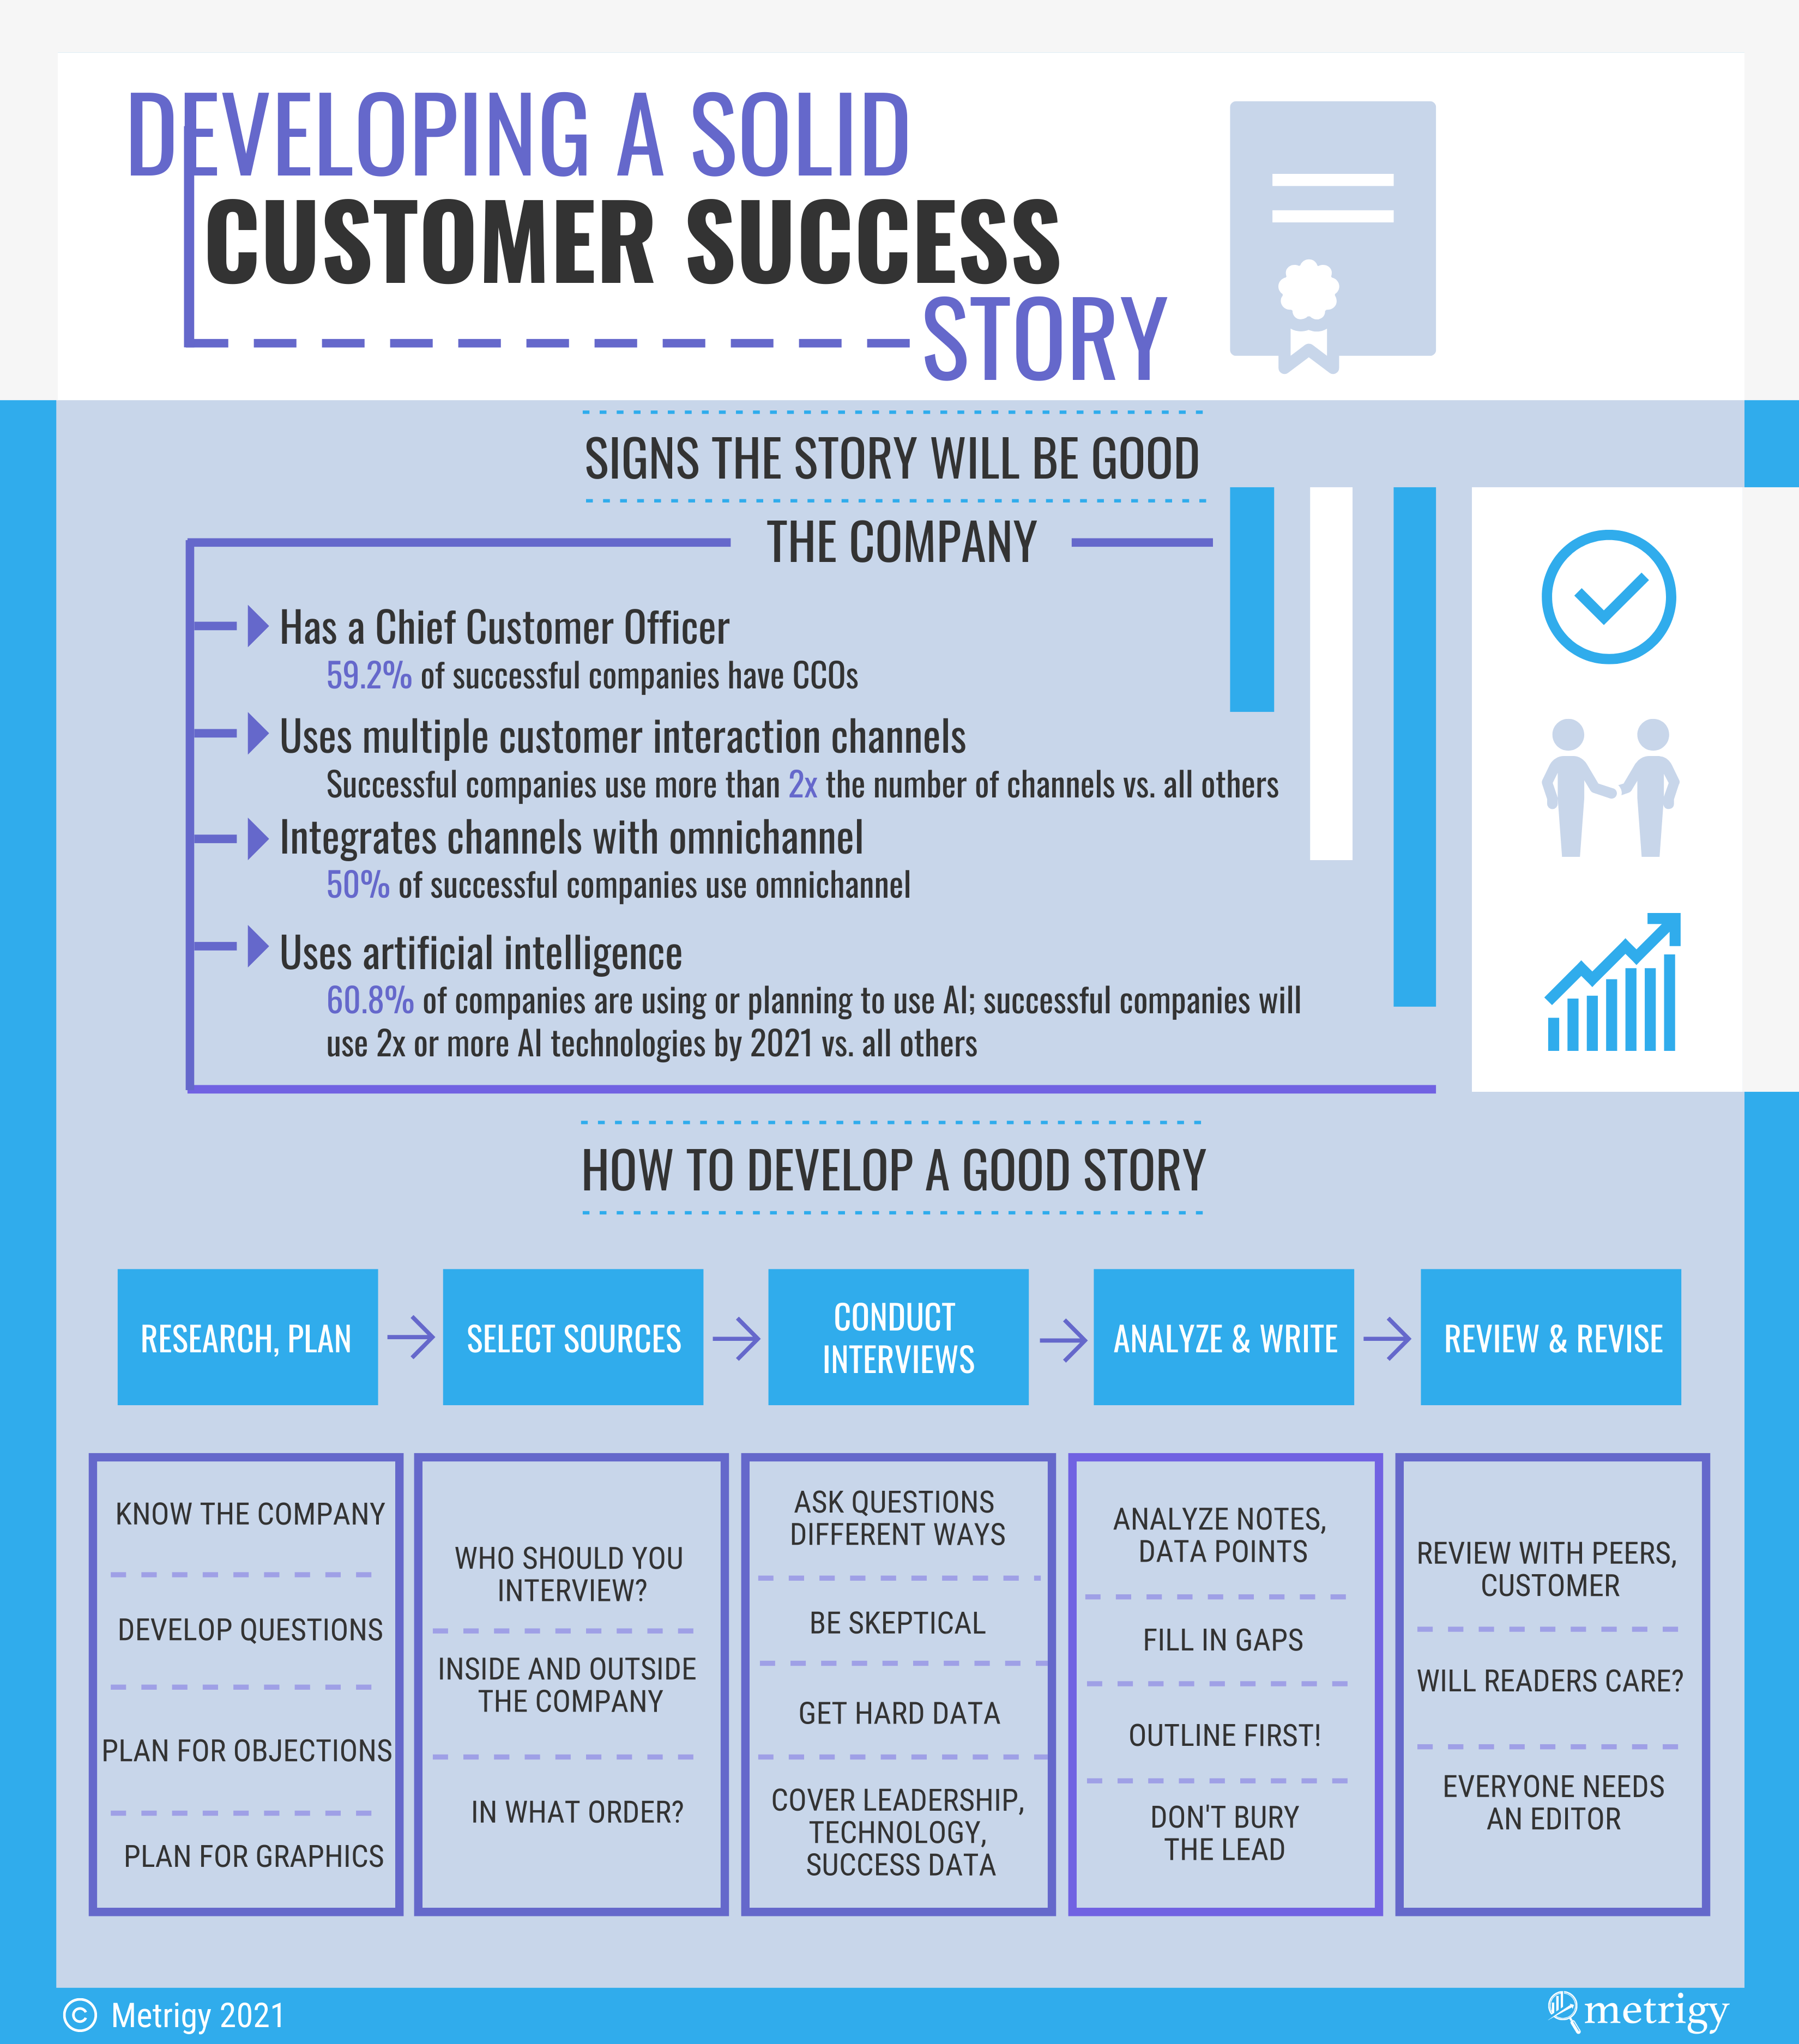 Developing a Solid Customer Success Story